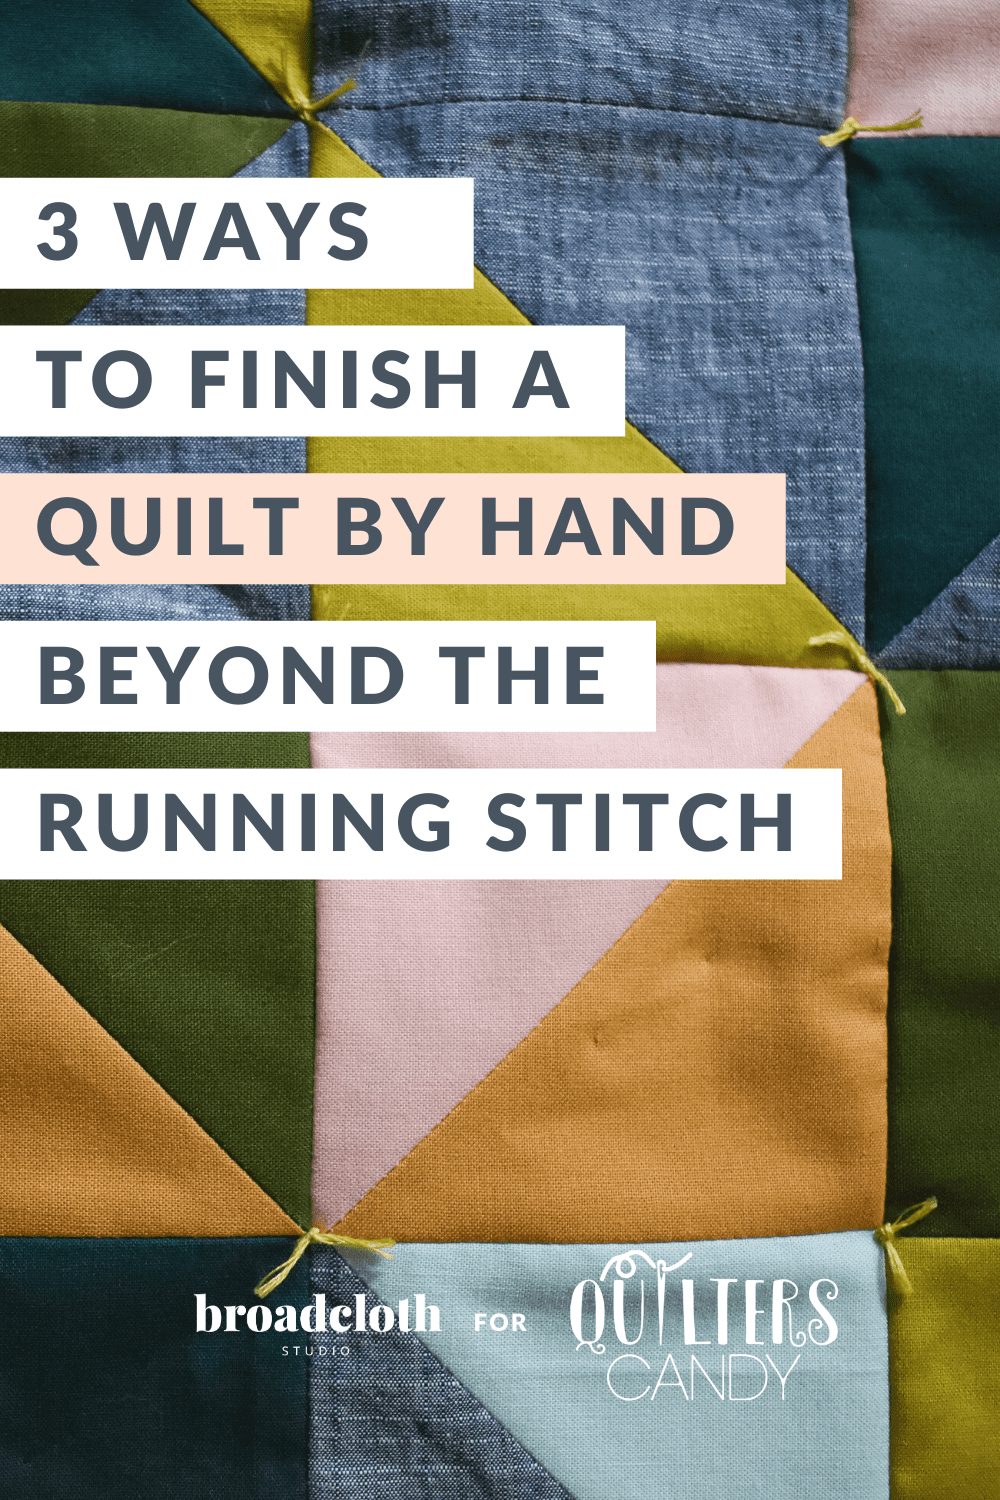 3 ways to finish a quilt by hand